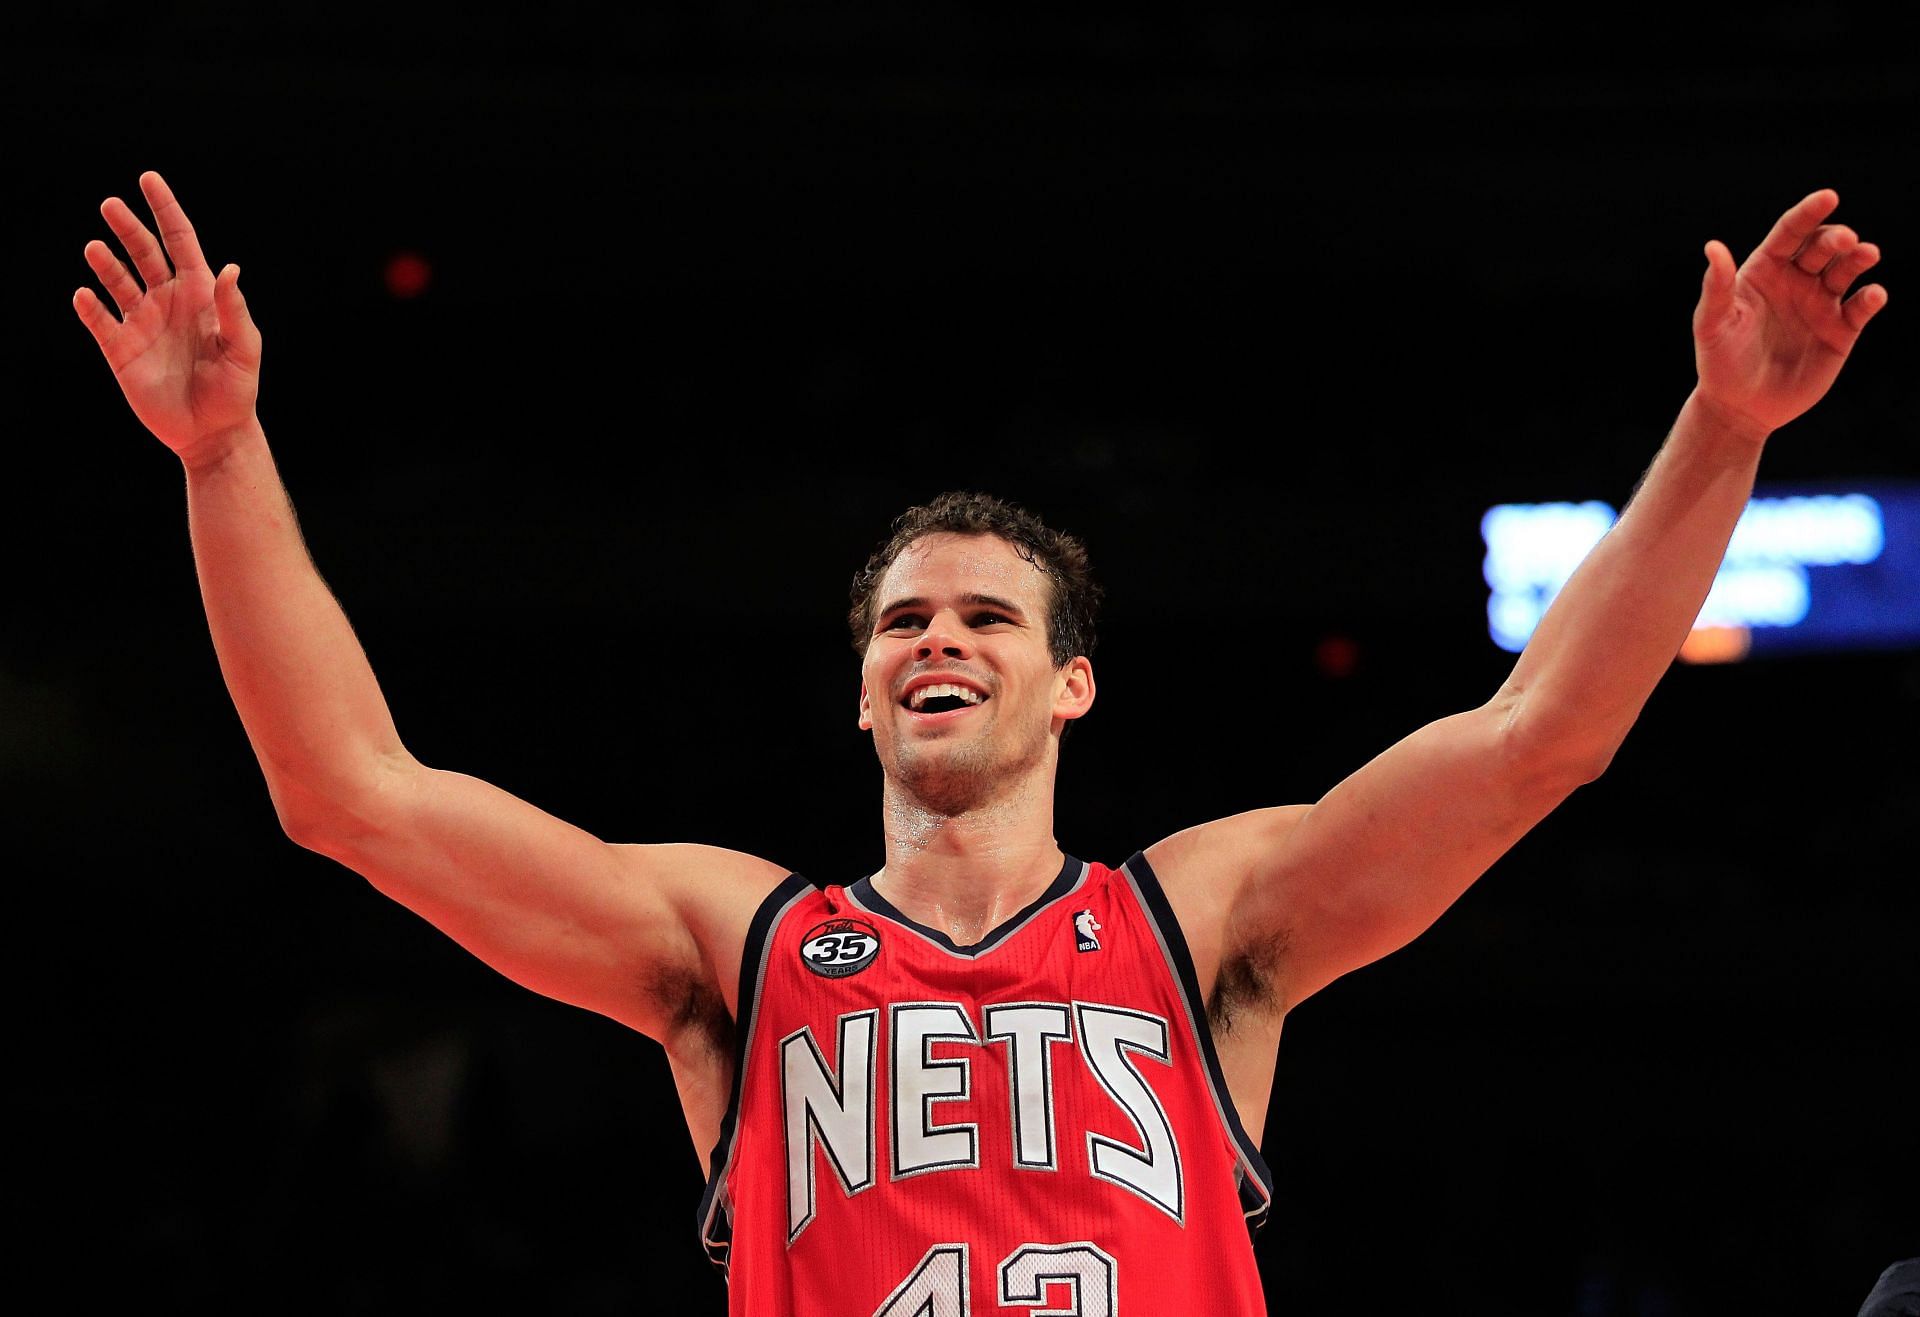 Kris Humphries had the best seasons of his career with the Nets (Image via Getty Images)